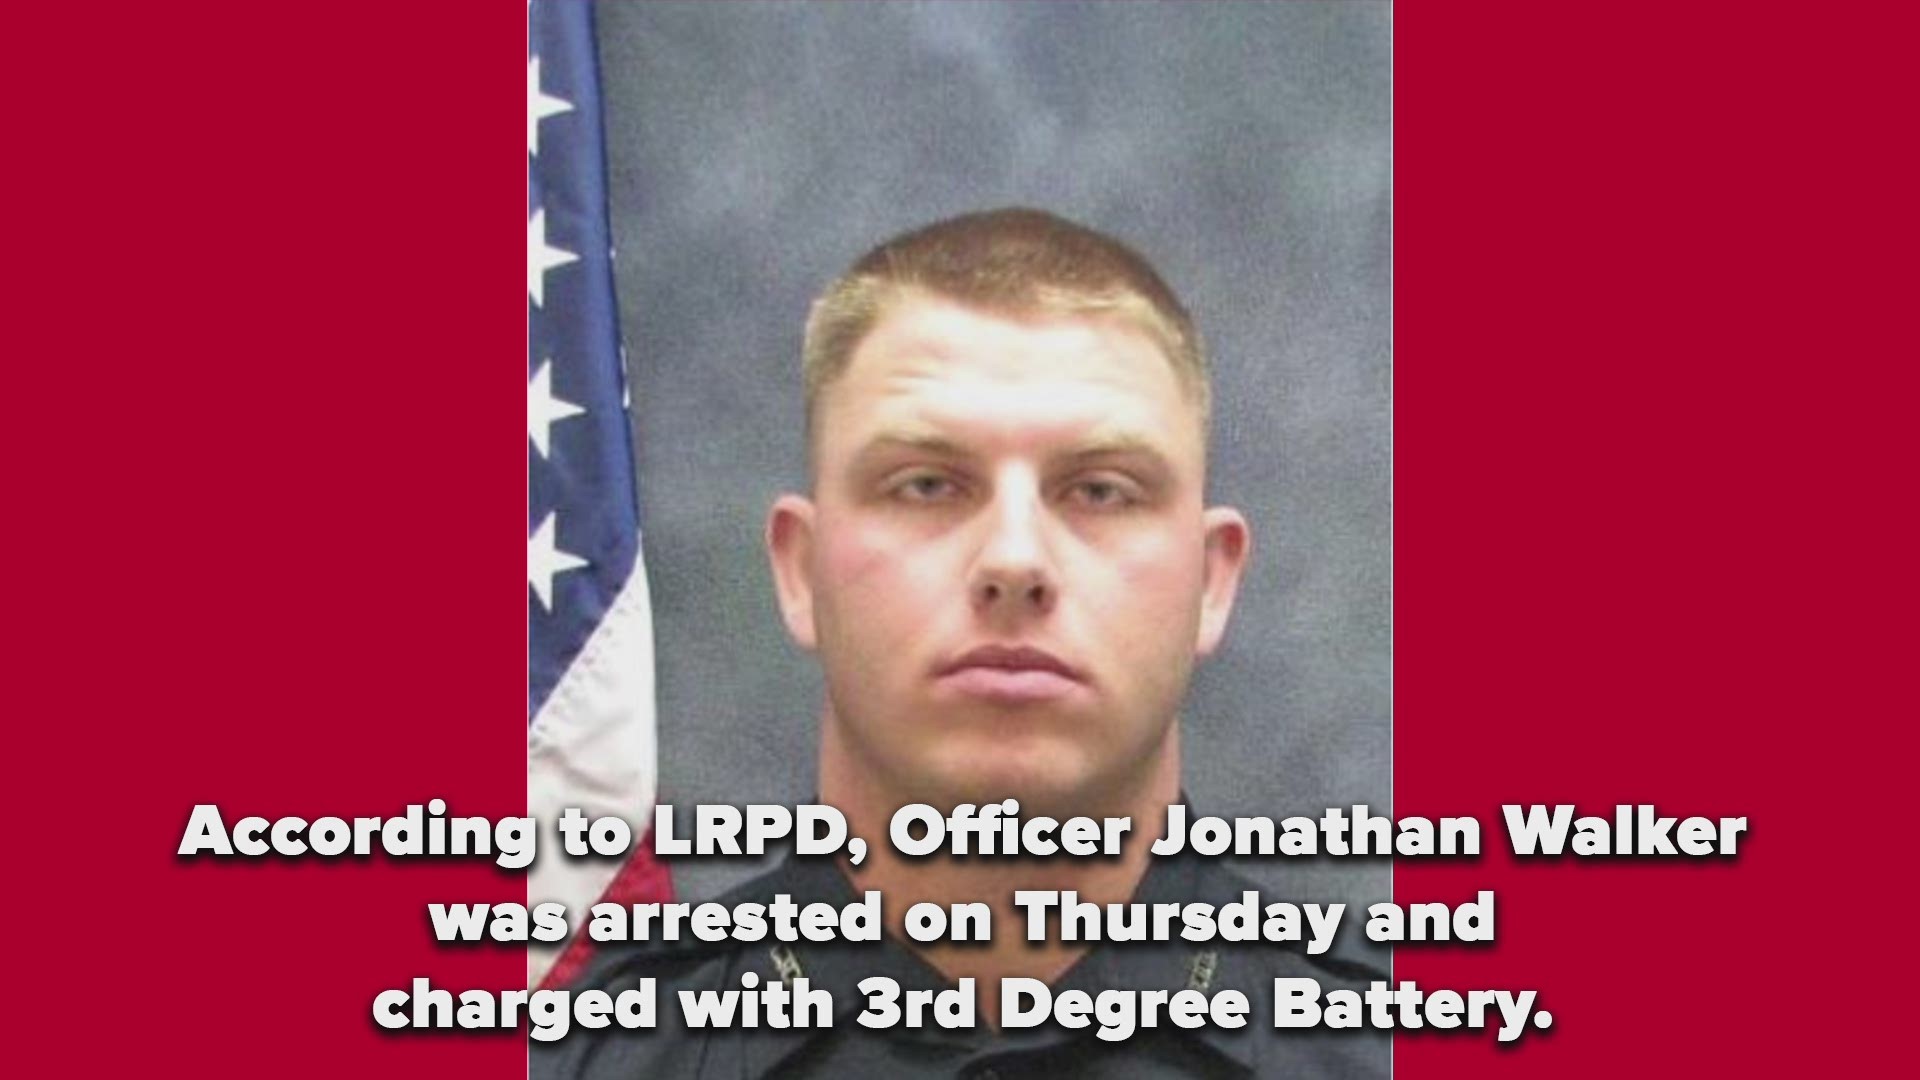 According to Little Rock police, Officer Jonathan Walker was arrested on Thursday and charged with 3rd Degree Battery.